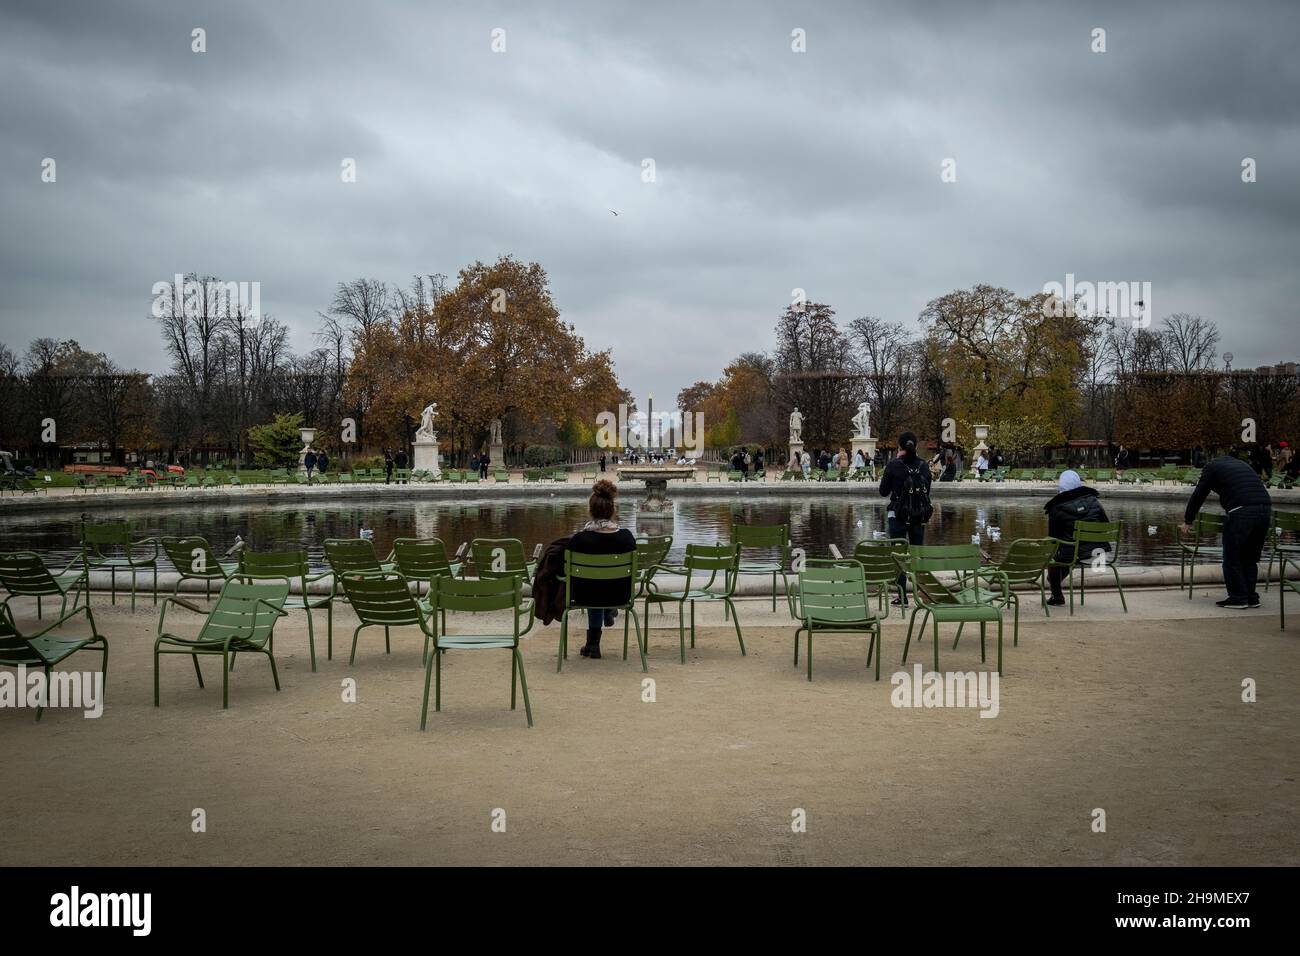 Tuileries Garden in Paris, France. The garden is a public garden located between the Louvre Museum and the Place de la Concorde in the 1st arrondissem Stock Photo